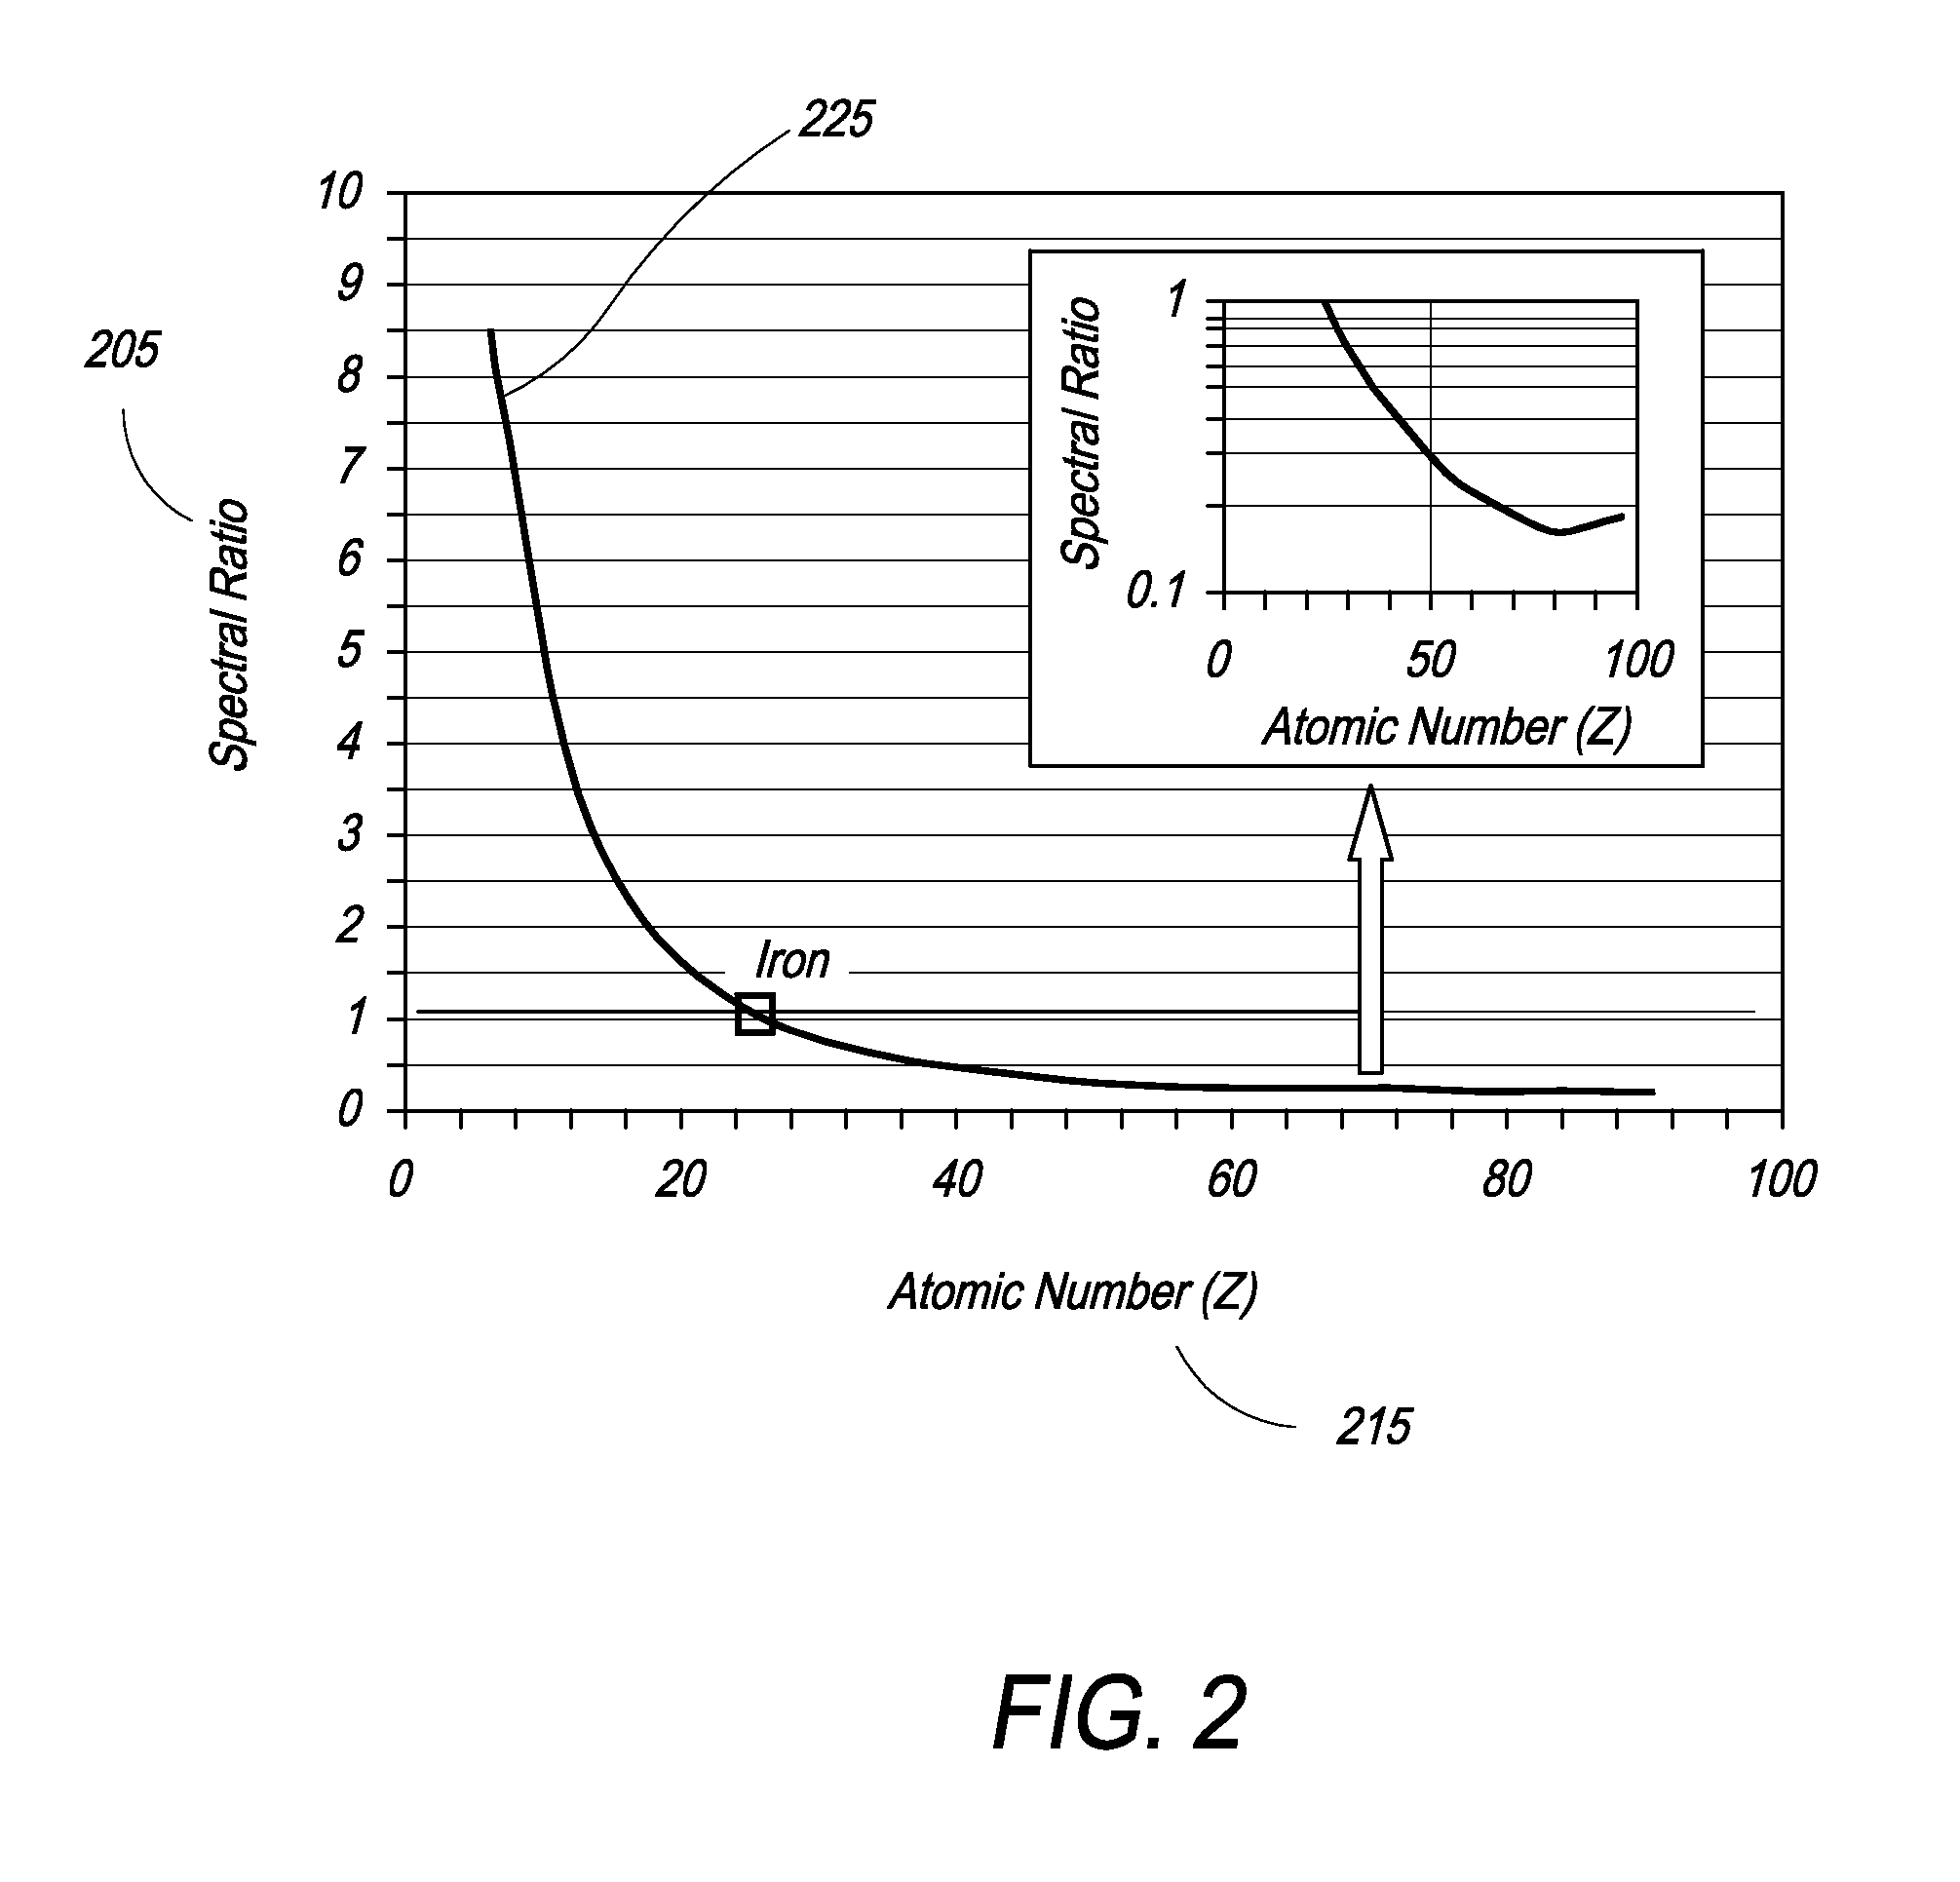 High-Energy X-Ray-Spectroscopy-Based Inspection System and Methods to Determine the Atomic Number of Materials